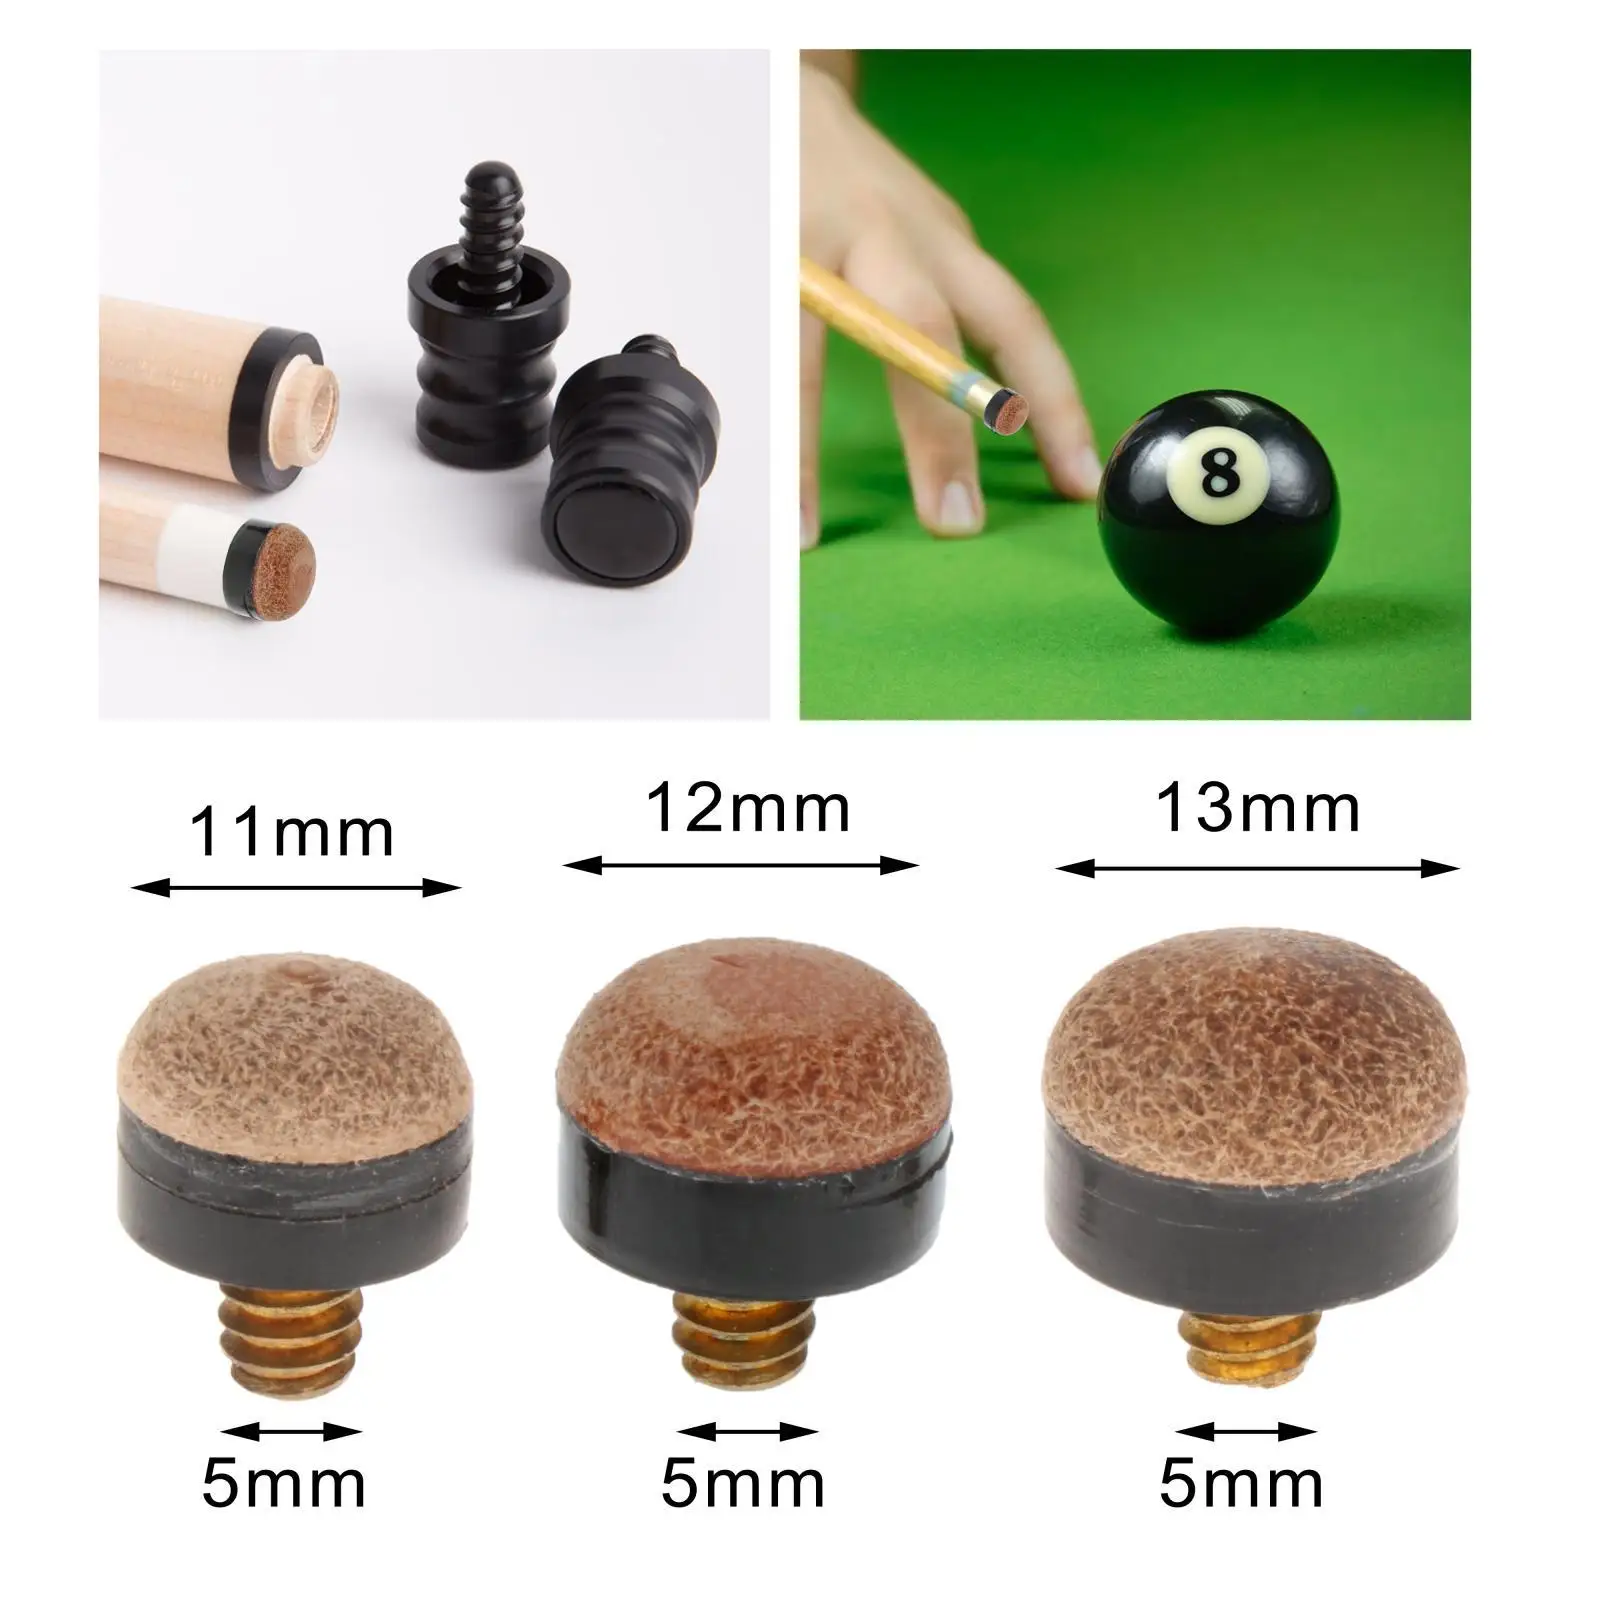 10 Pieces Billiards Cue Tip Screw on Snooker Cue Tip Indoor Game Hard Tips Portable Billiard Pool Cue Tips for Billiards Players